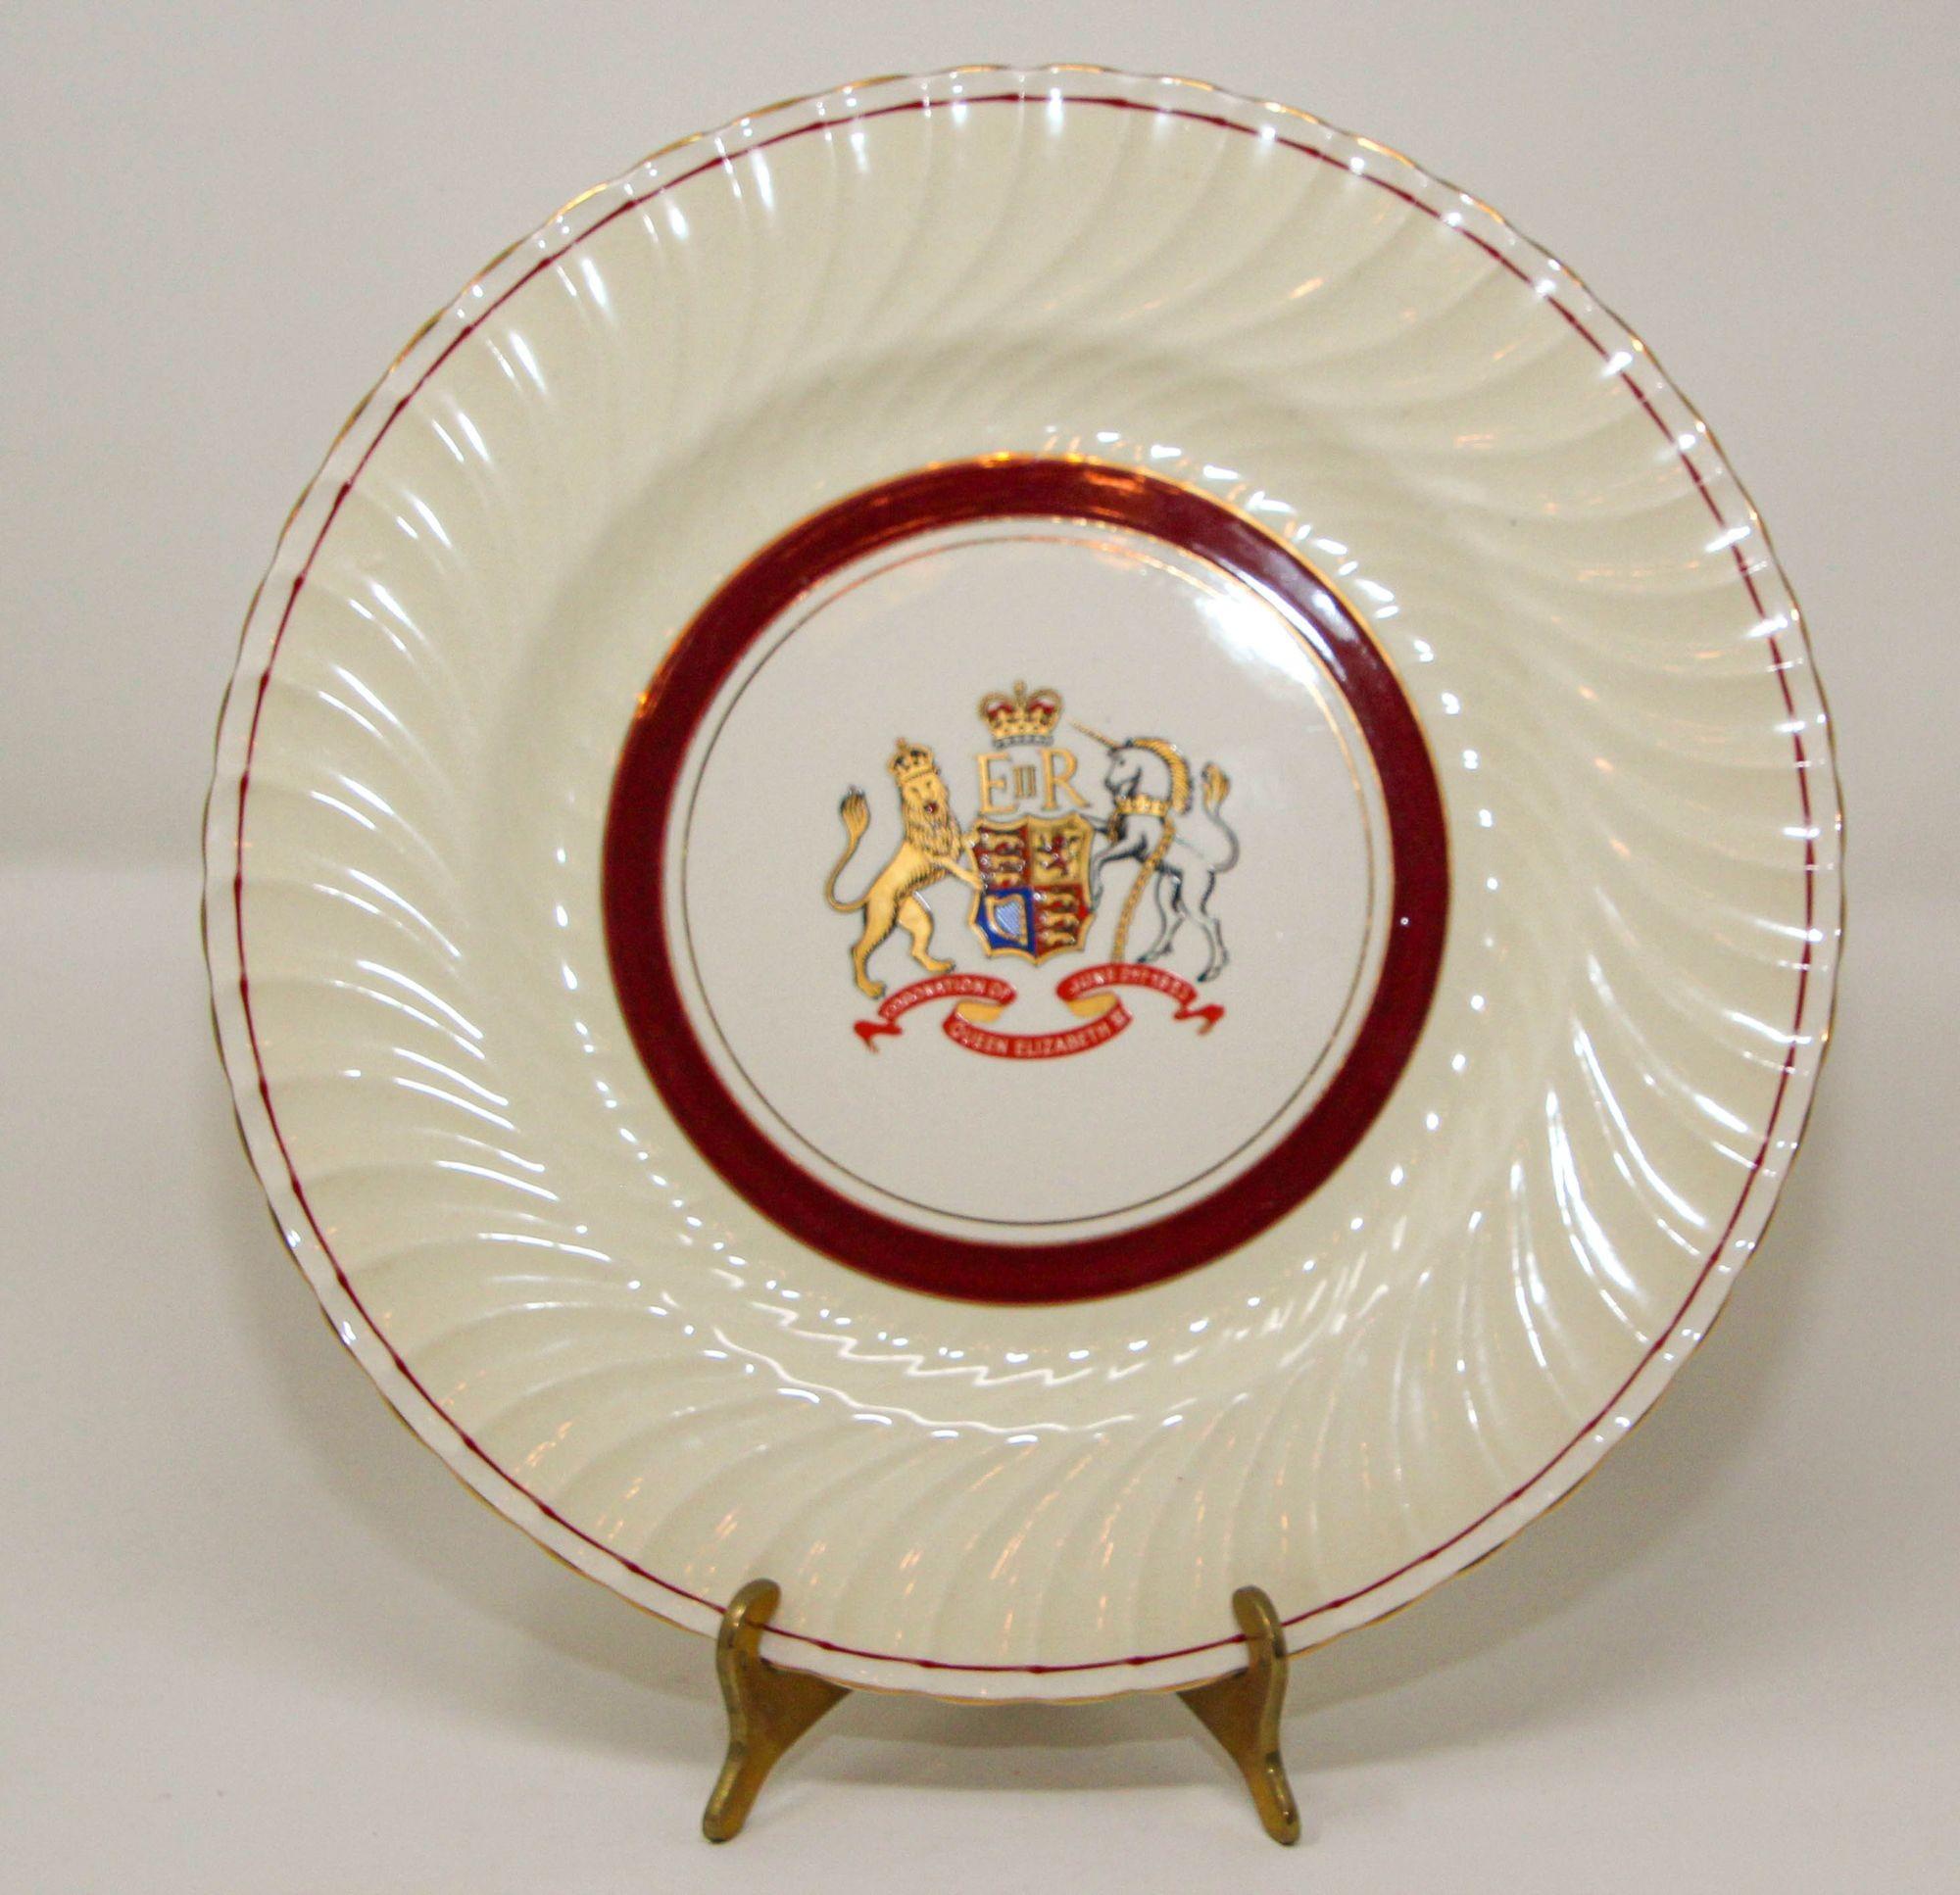 Coronation Plate Queen Elizabeth II June 2nd 1953 Burleigh Ware Burslem England.
Beautiful plate commemorating the Coronation of Her Majesty Queen Elizabeth II on June 2, 1953.
Vintage 1953 Coronation Queen Elisabeth 2nd Plate.
Vintage piece of